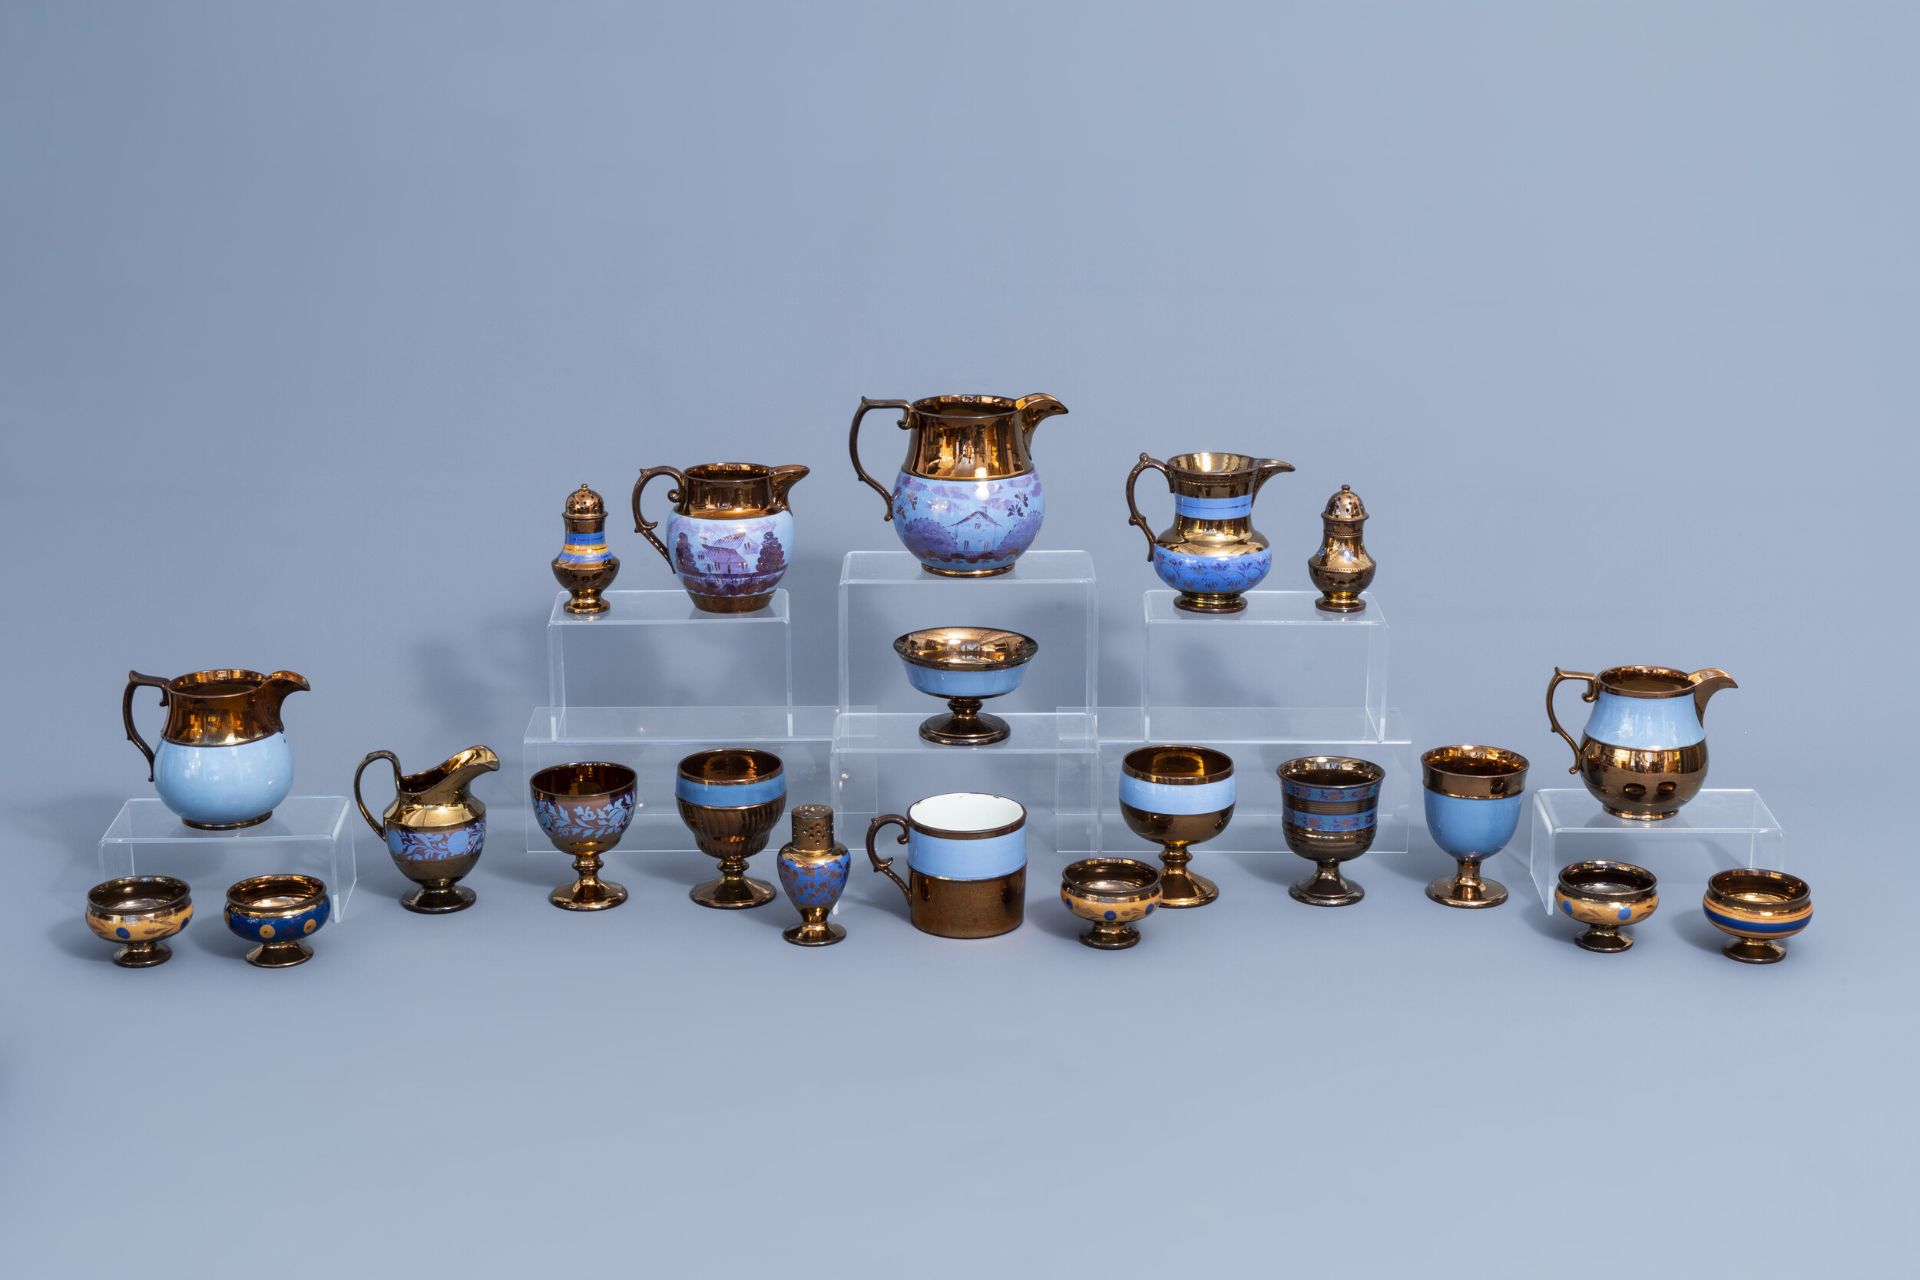 A varied collection of English lustreware items with blue design, 19th C. - Image 2 of 50